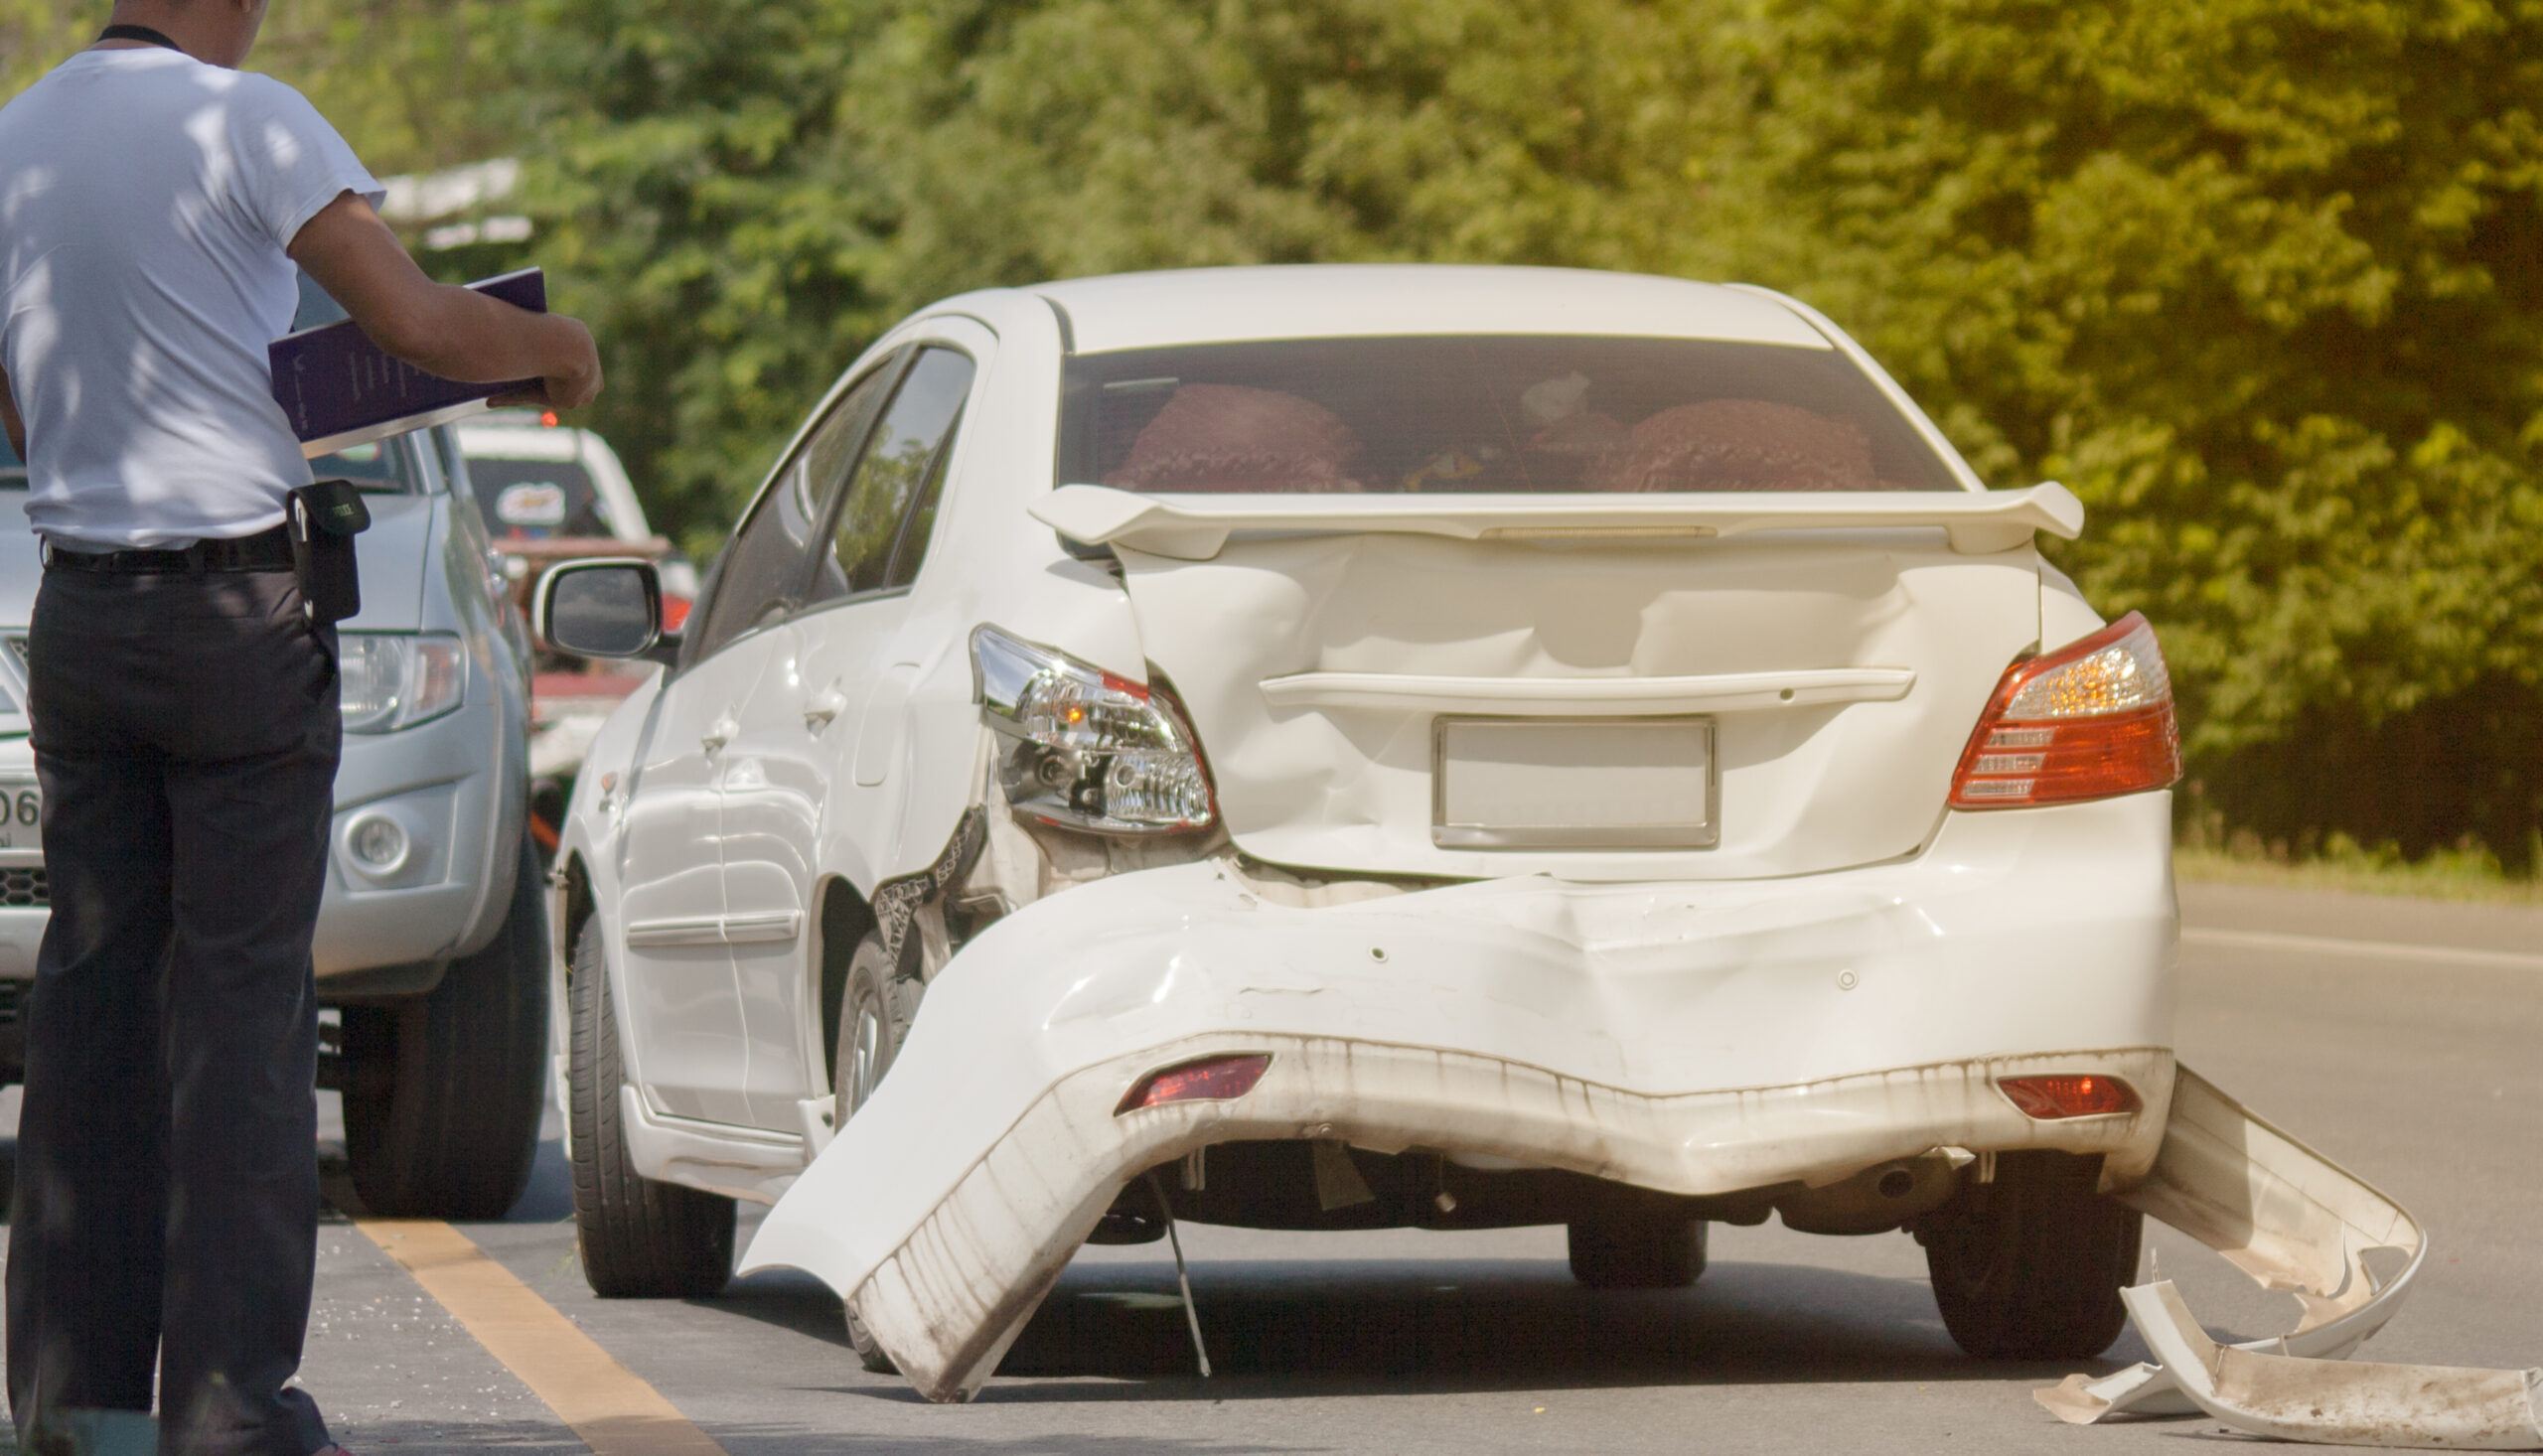 An insurance adjuster evaluates a vehicle